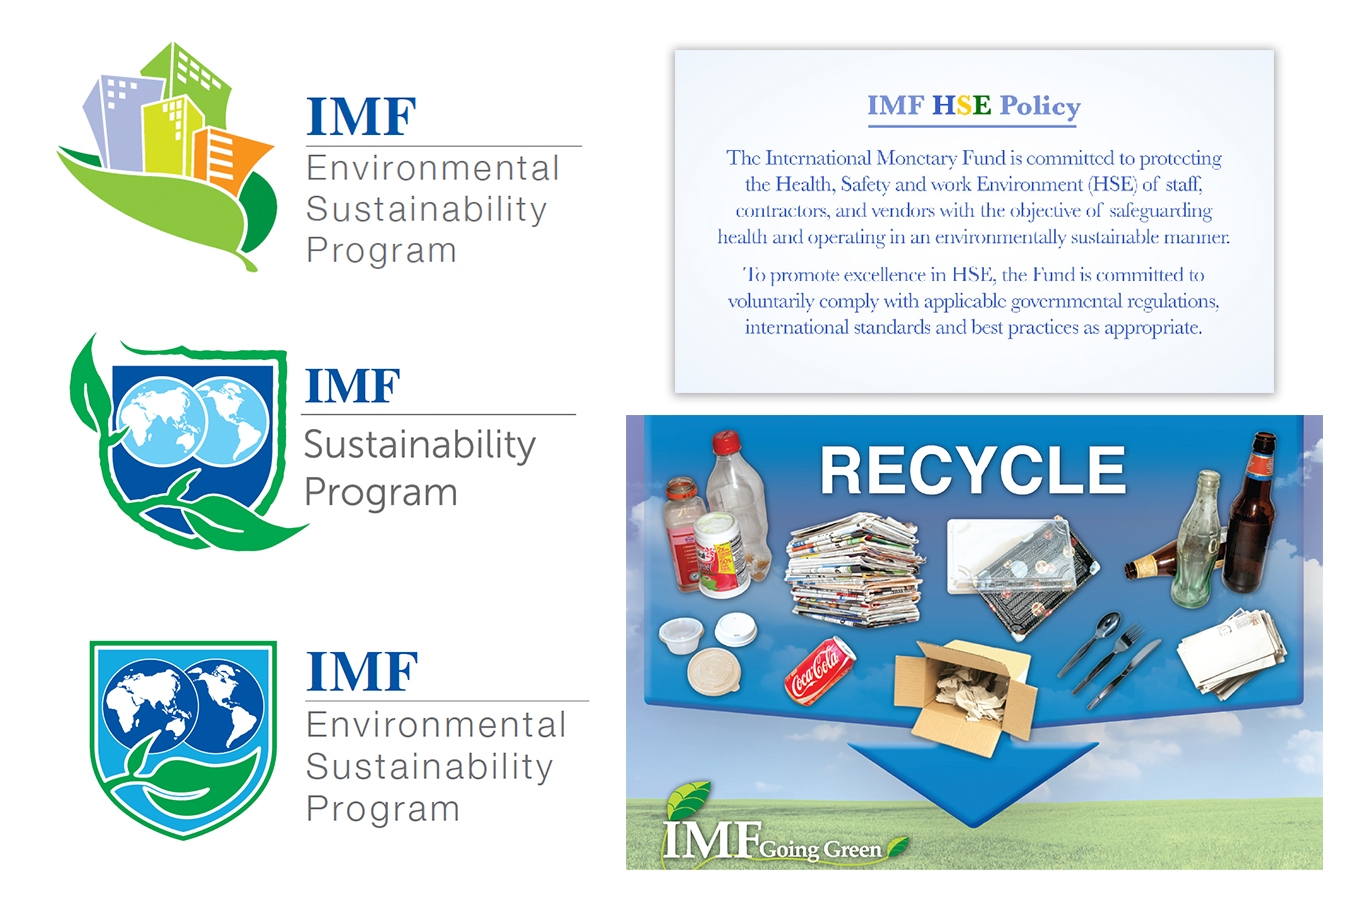 logo 26 : IMF sustainability program logos and recycle wall graphic for cafeteria waste 